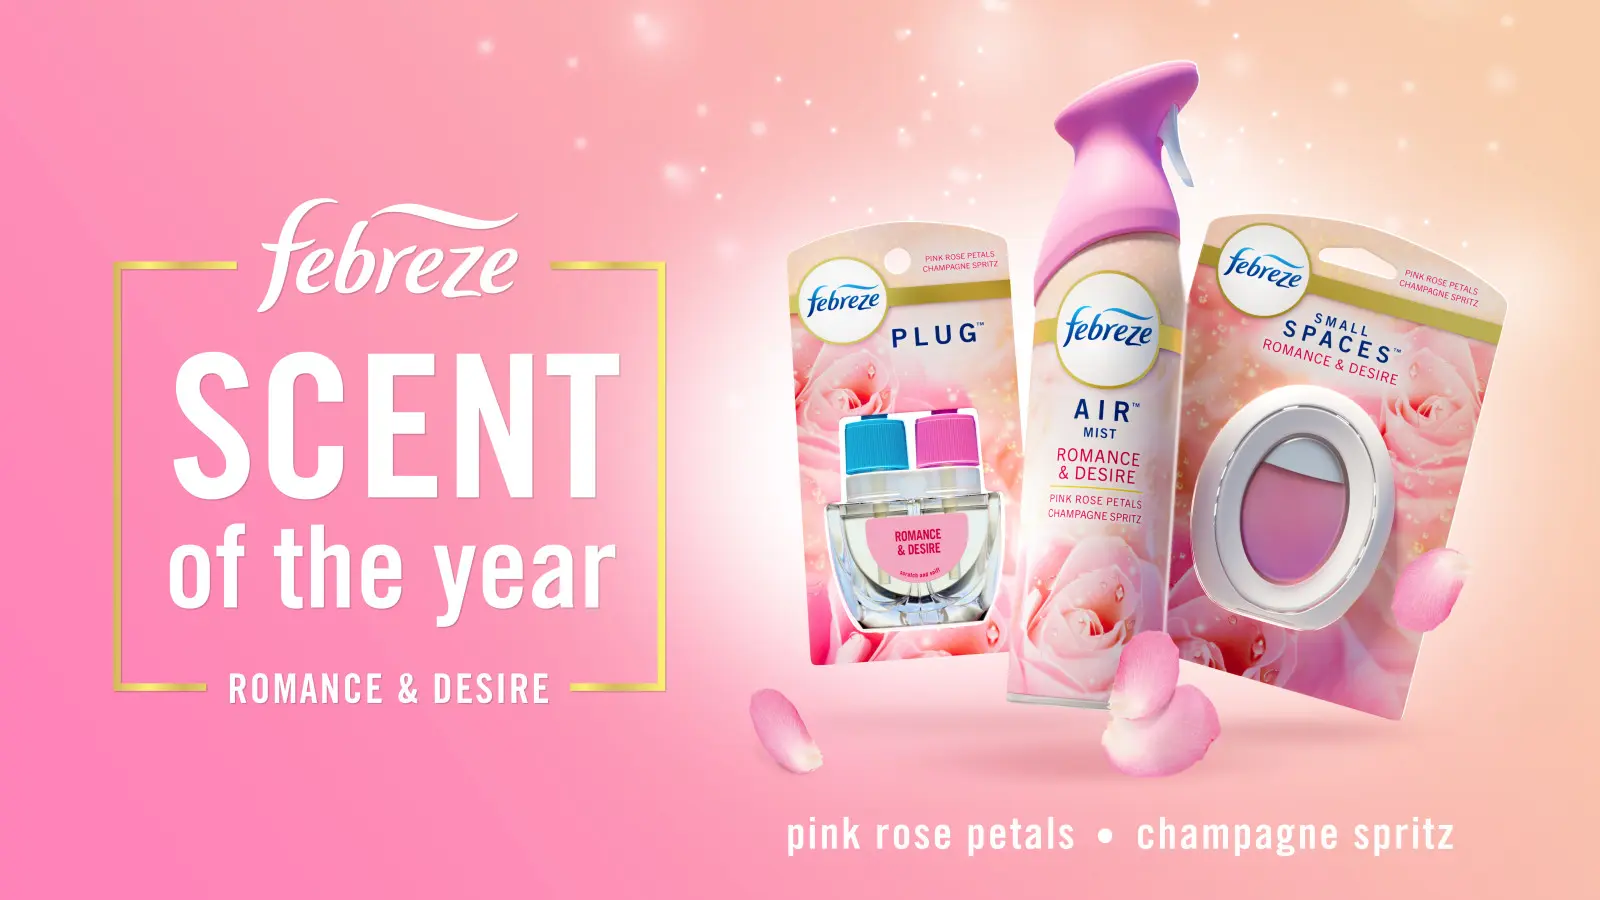 Three pink Febreze air freshener products are displayed. Two plug-in fragrances and one aerosol spray bottle. The background is pink and sparkly. A white and gold text graphic on the left says "Febreze scent of the year. Romance and desire."